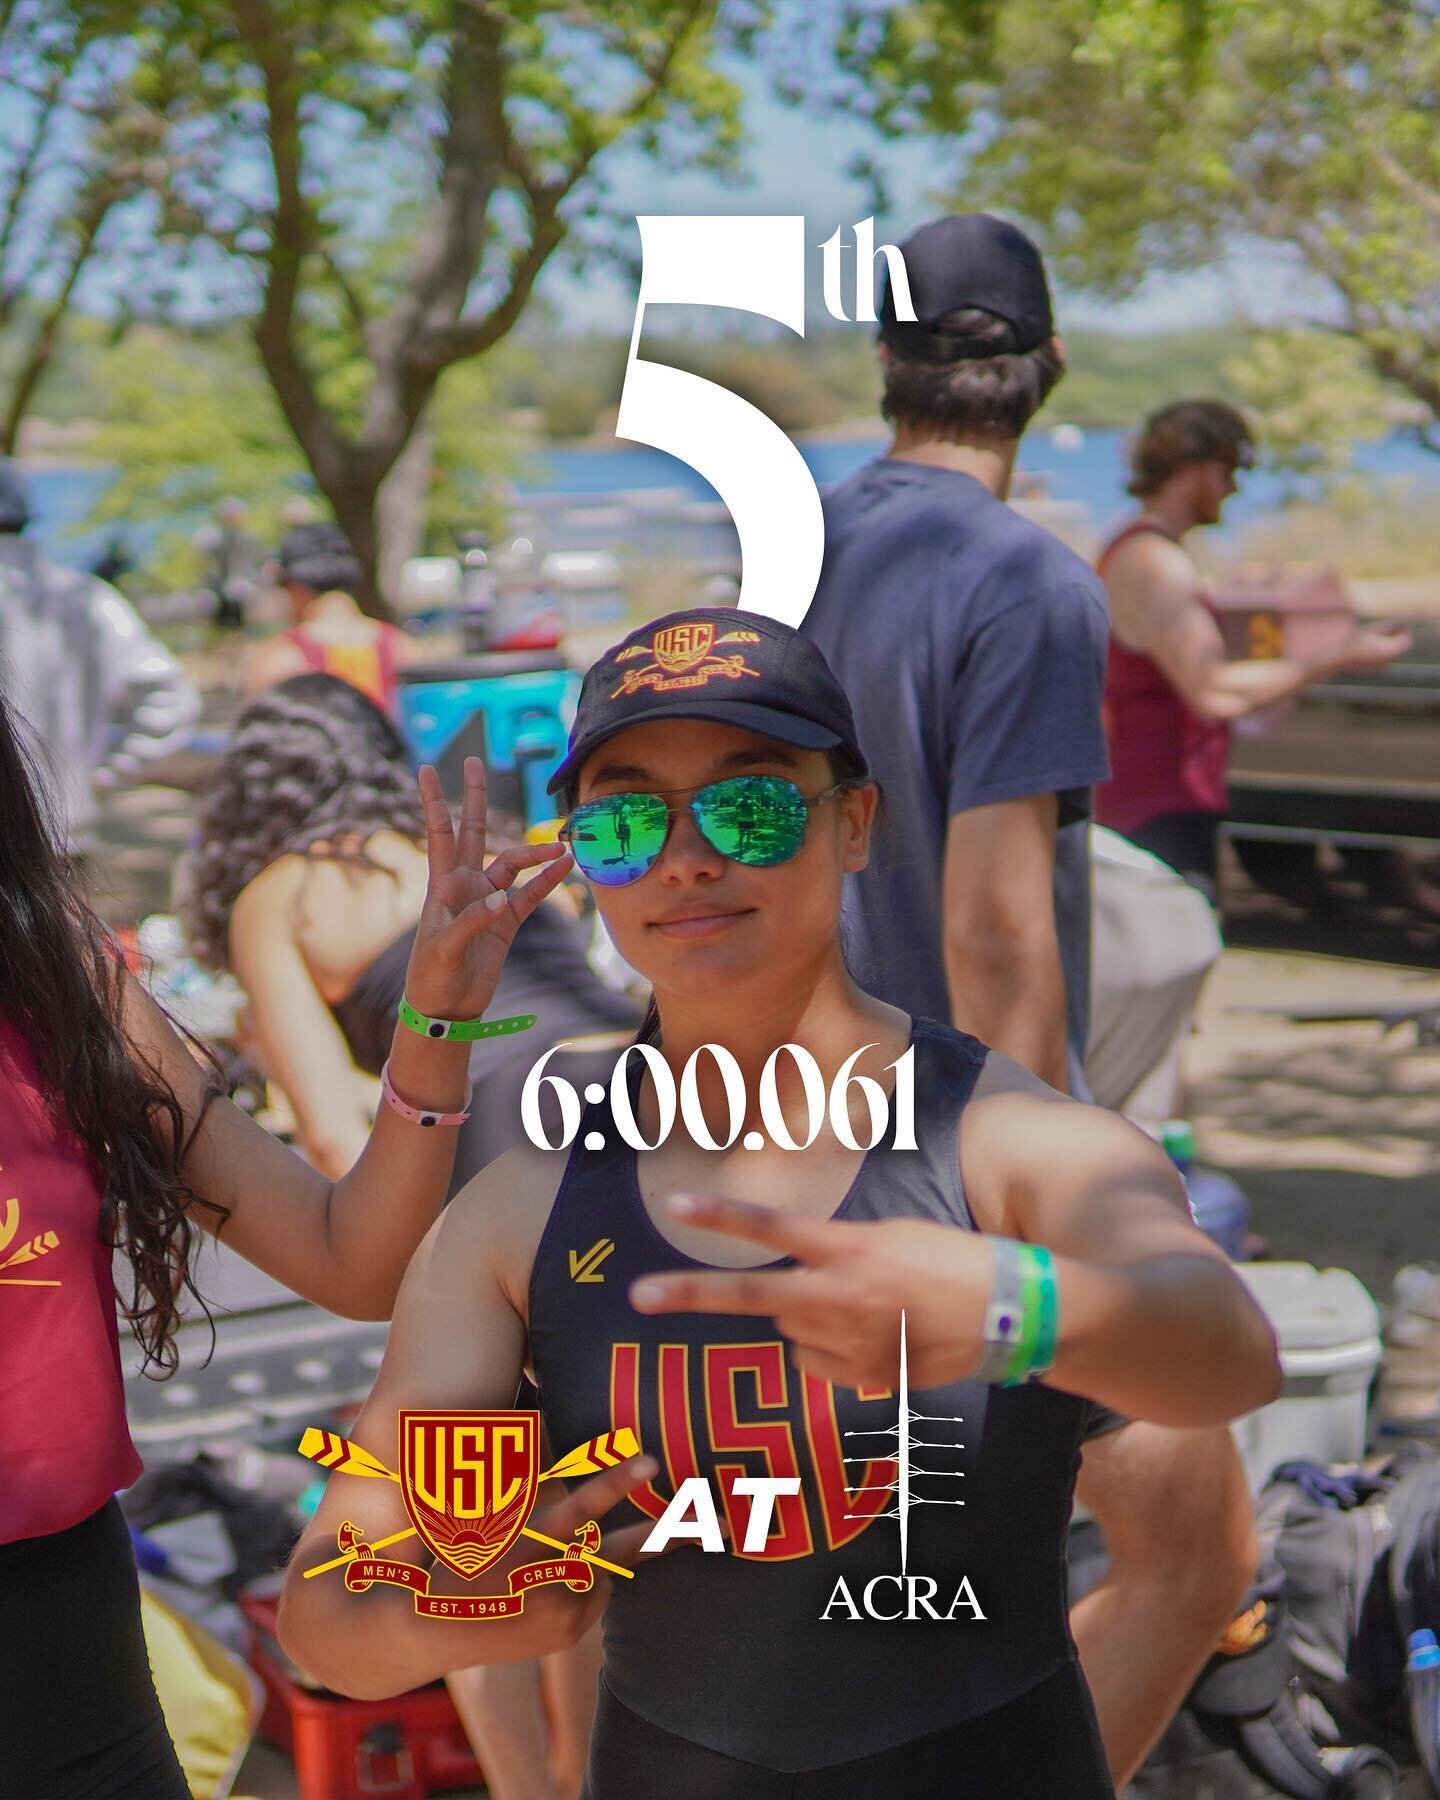 After an EXCITING day of heats and time trials (1750m), we look forward to what the weekend will hold! #row #crew #usc #fighton✌️ #acra